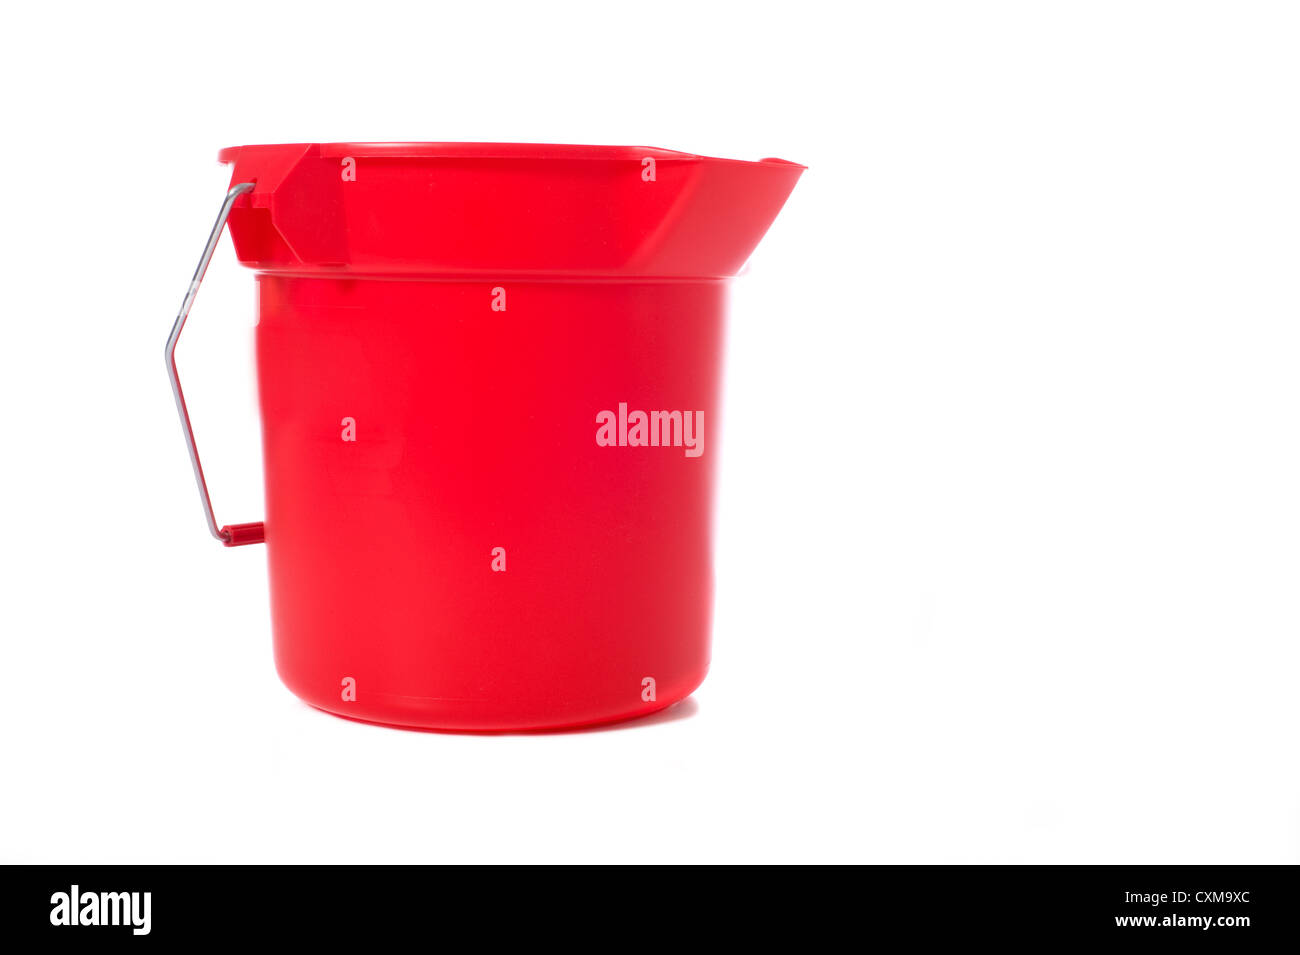 A red bucket or pale on a white background Stock Photo